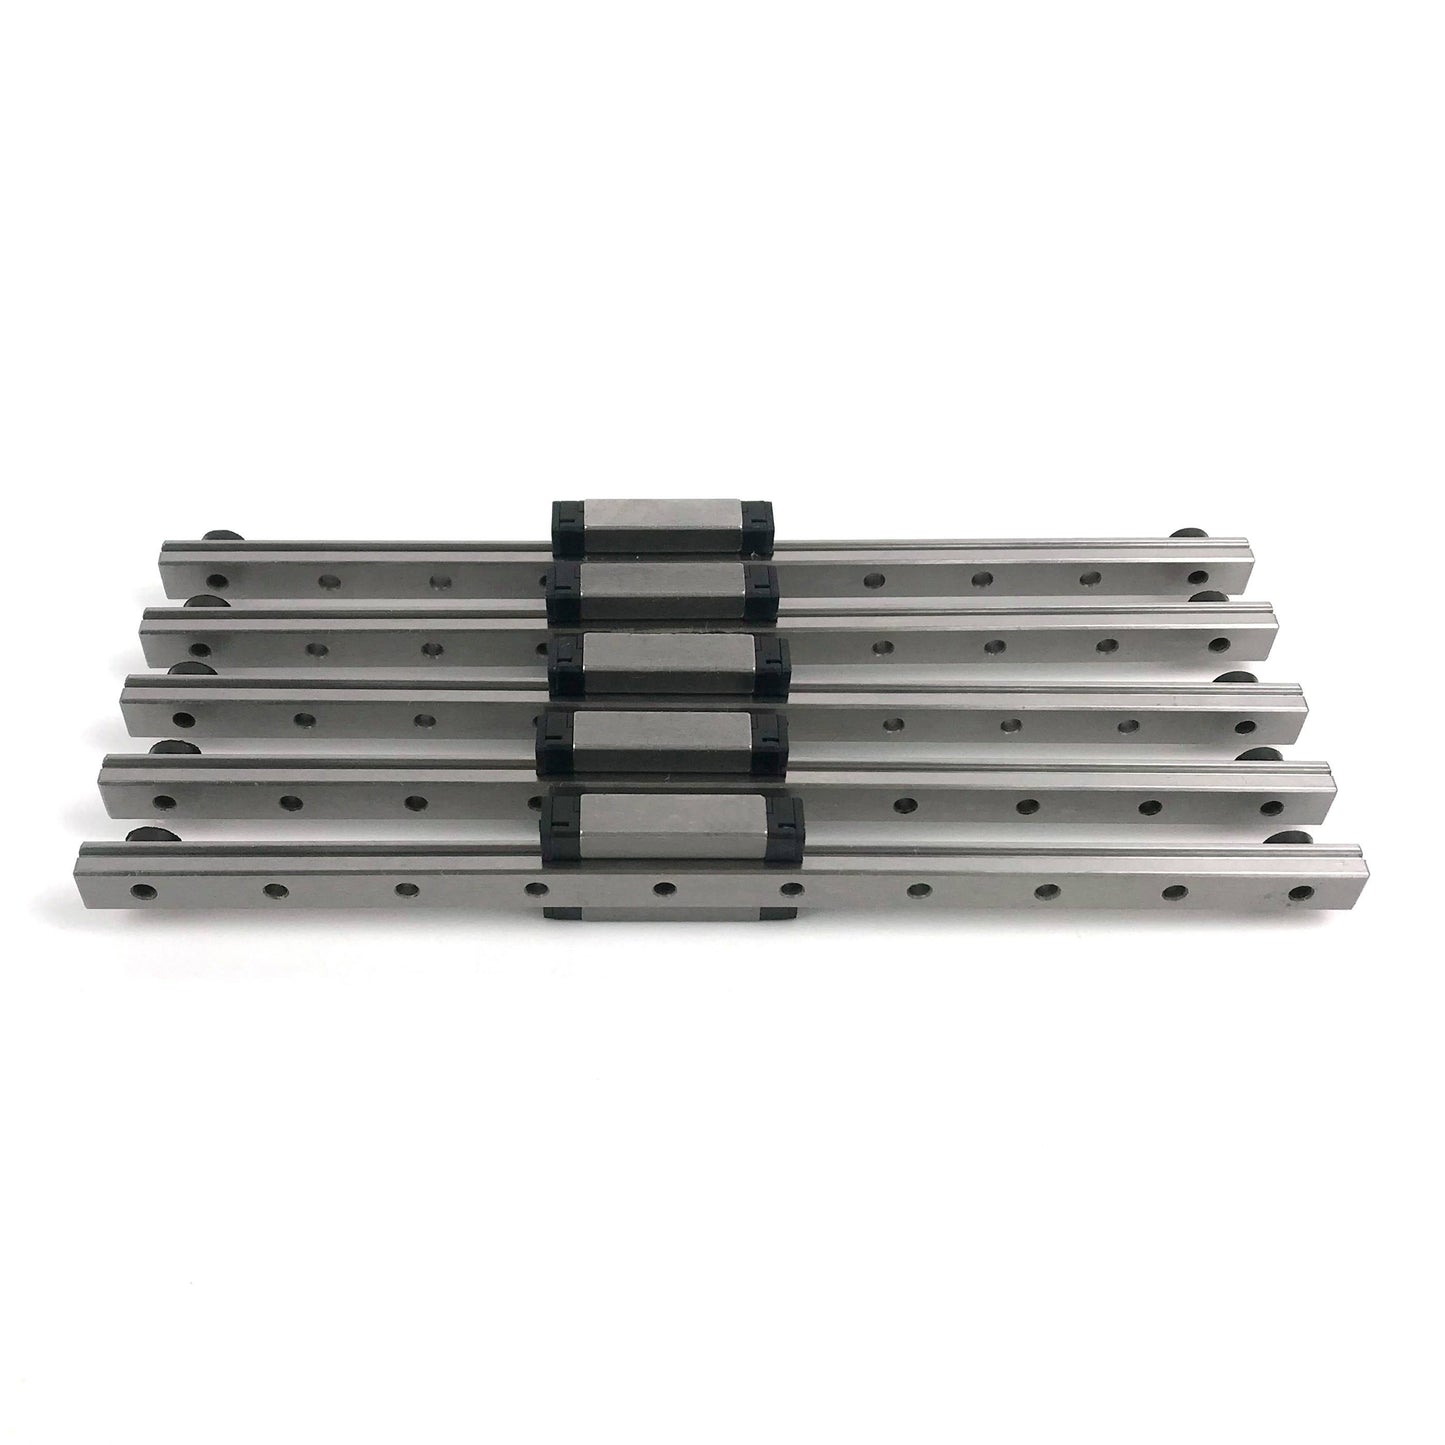 LDO Linear Rail SLR7H Stainless Linear Rail with Carriage (150mm) 5 pack Voron V0 and V0.1